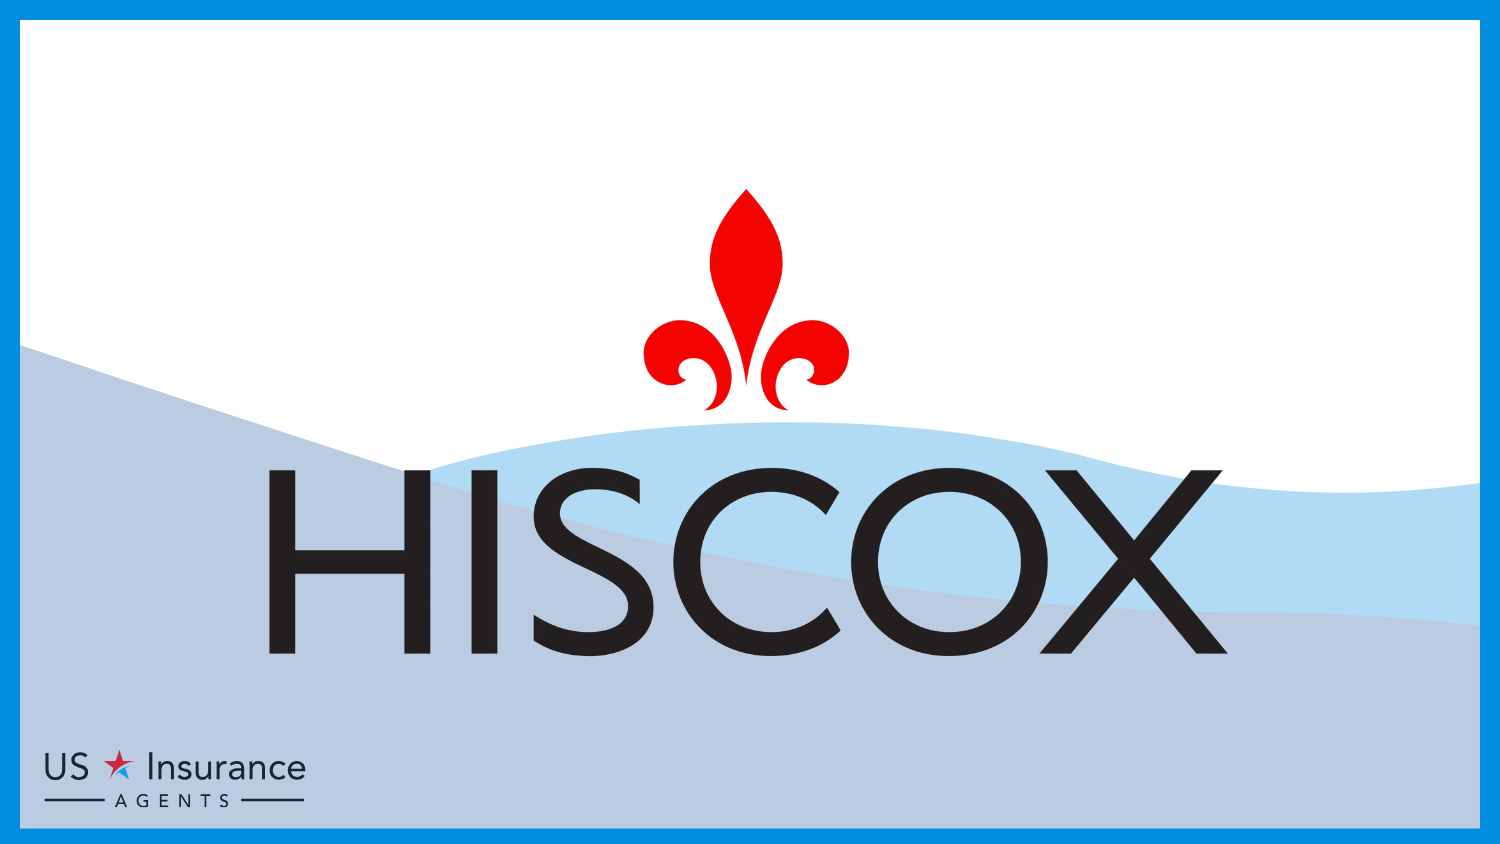 Hiscox: Best Business Insurance Companies for Museums